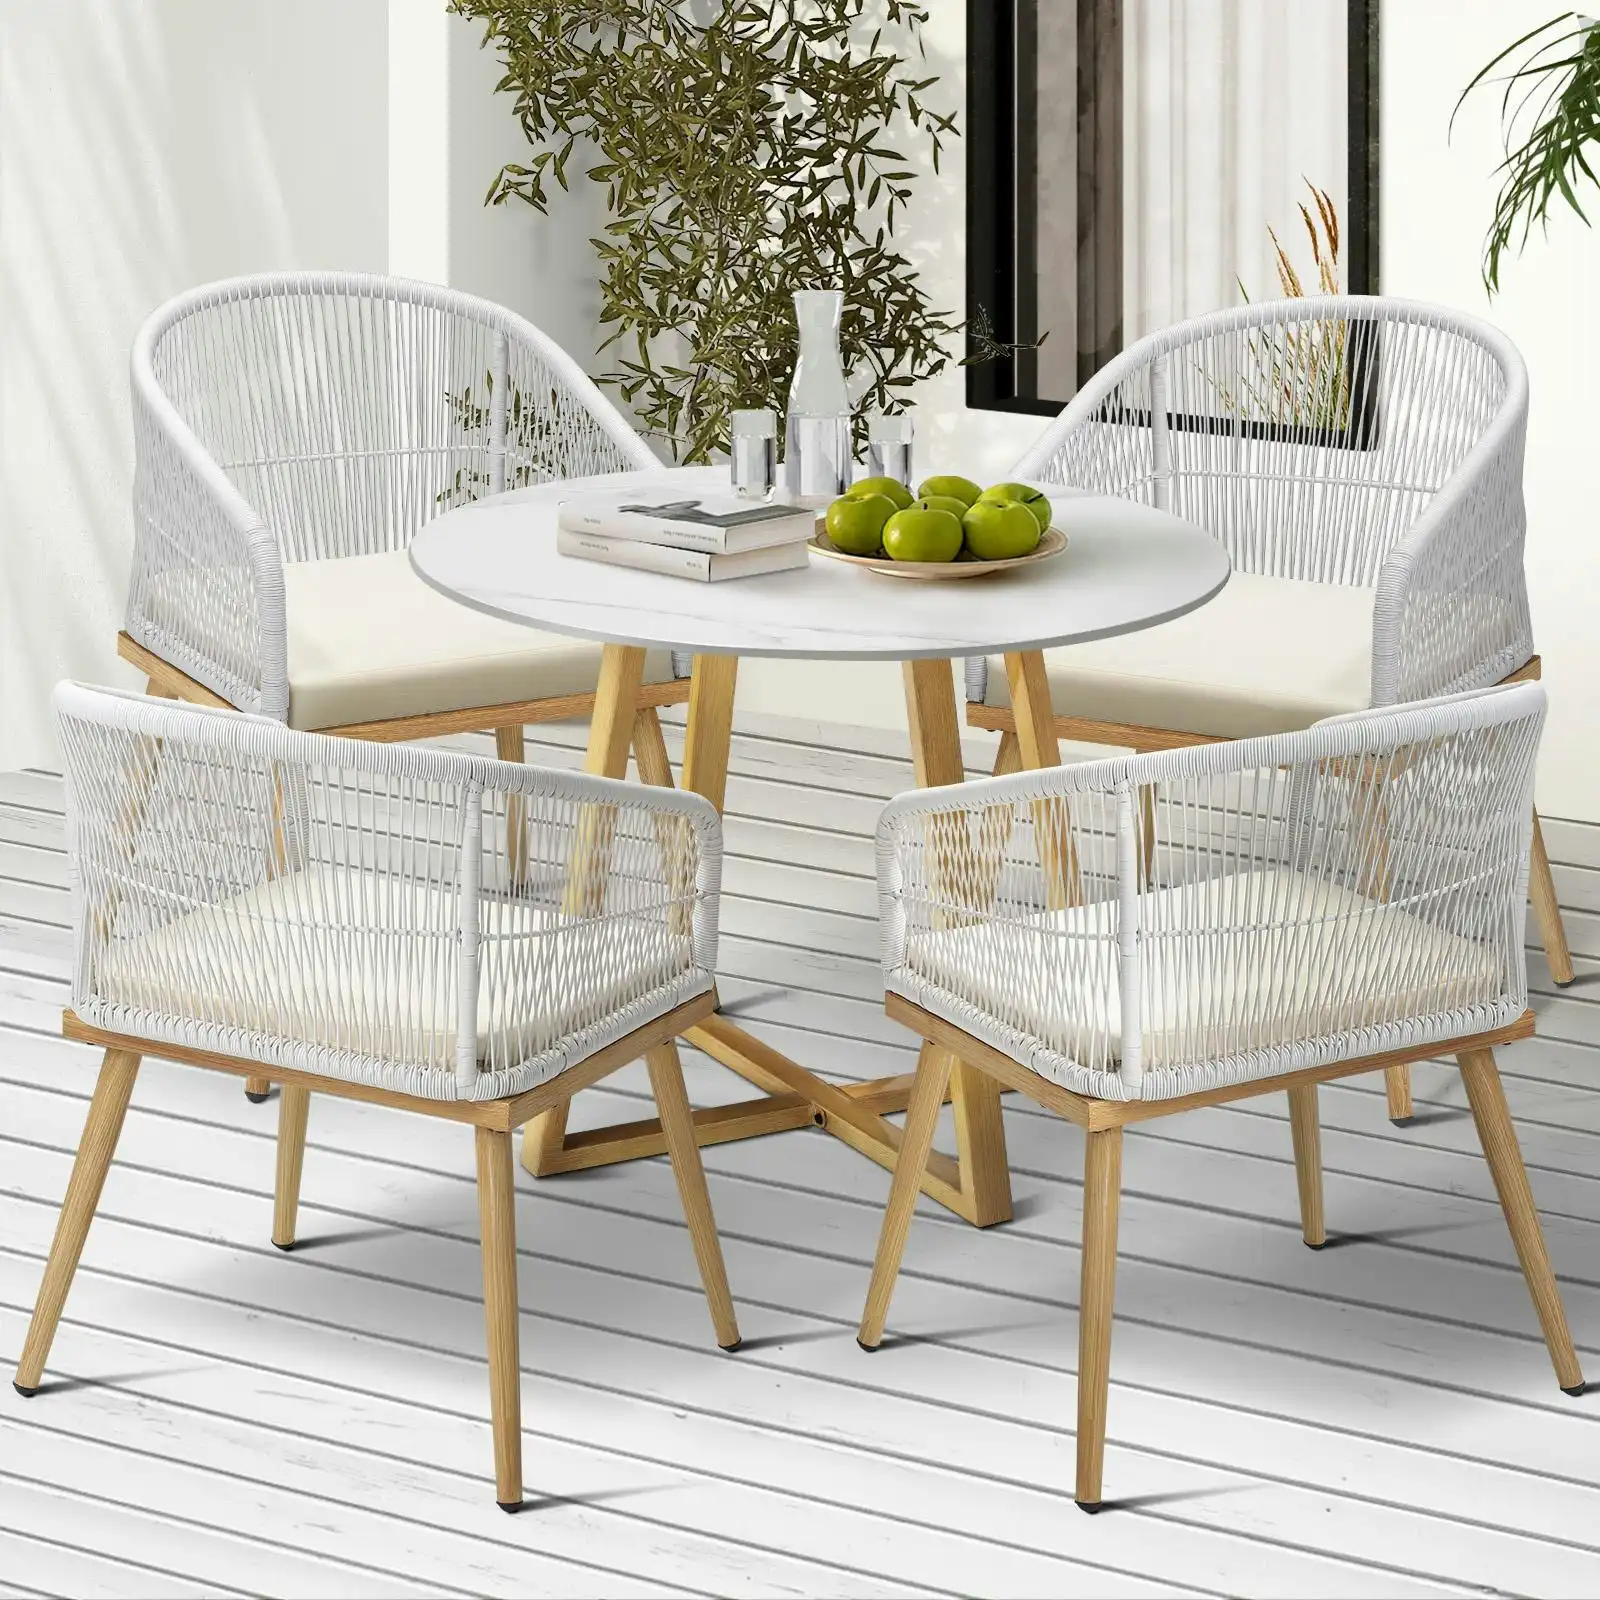 Livsip 5 Piece Outdoor Dining Setting Table Lounge Chairs Patio Furniture Set